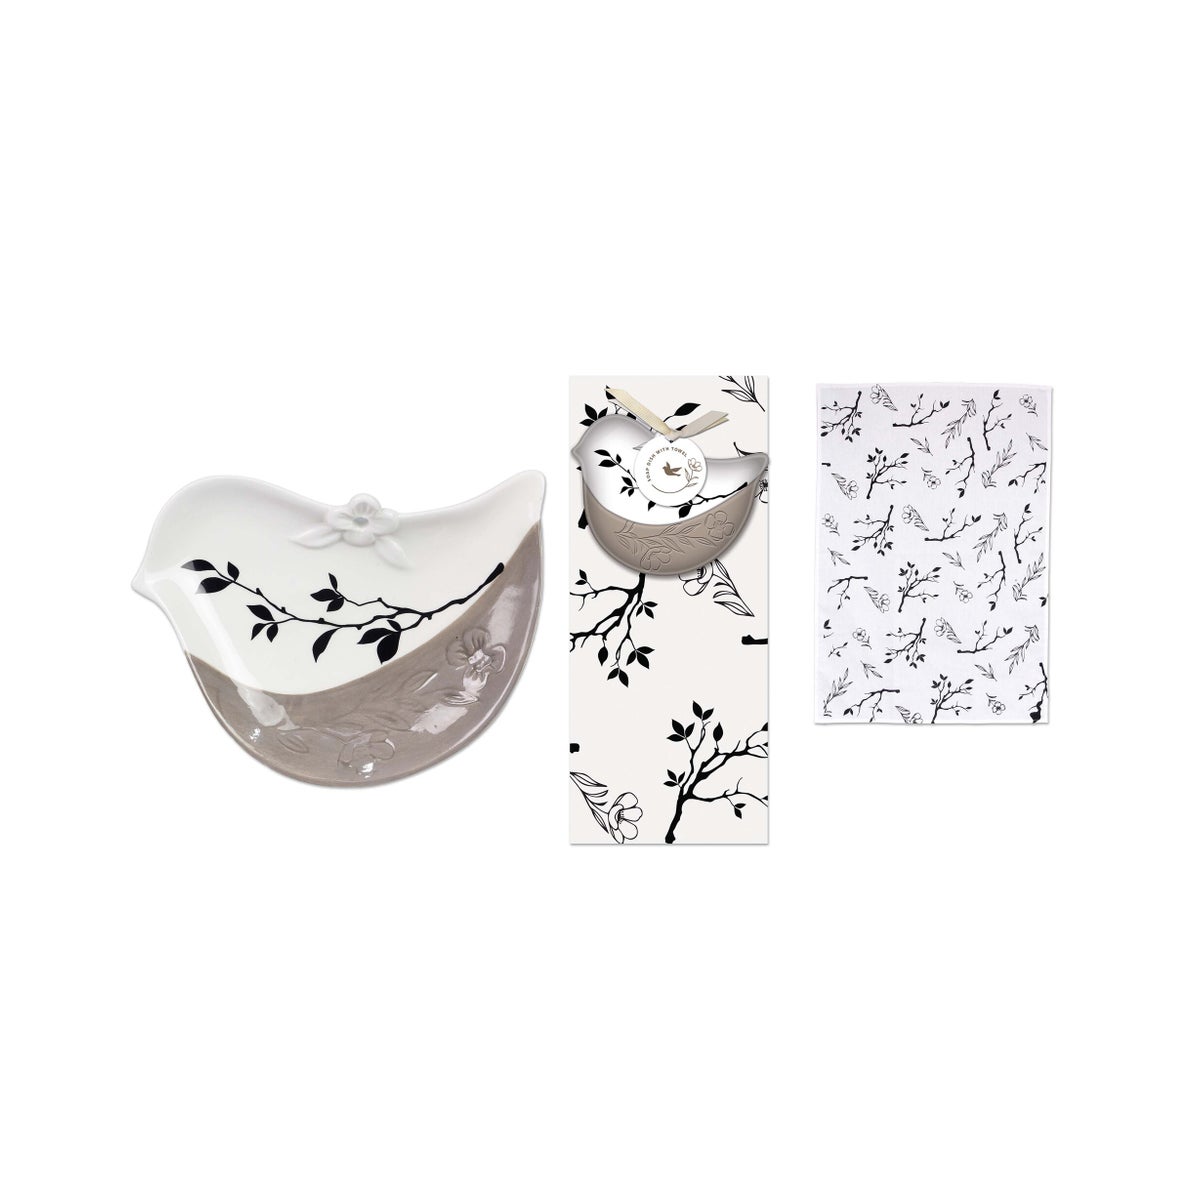 Ceramic Gray and White Bird Soap Dish with Cotton Towel Set